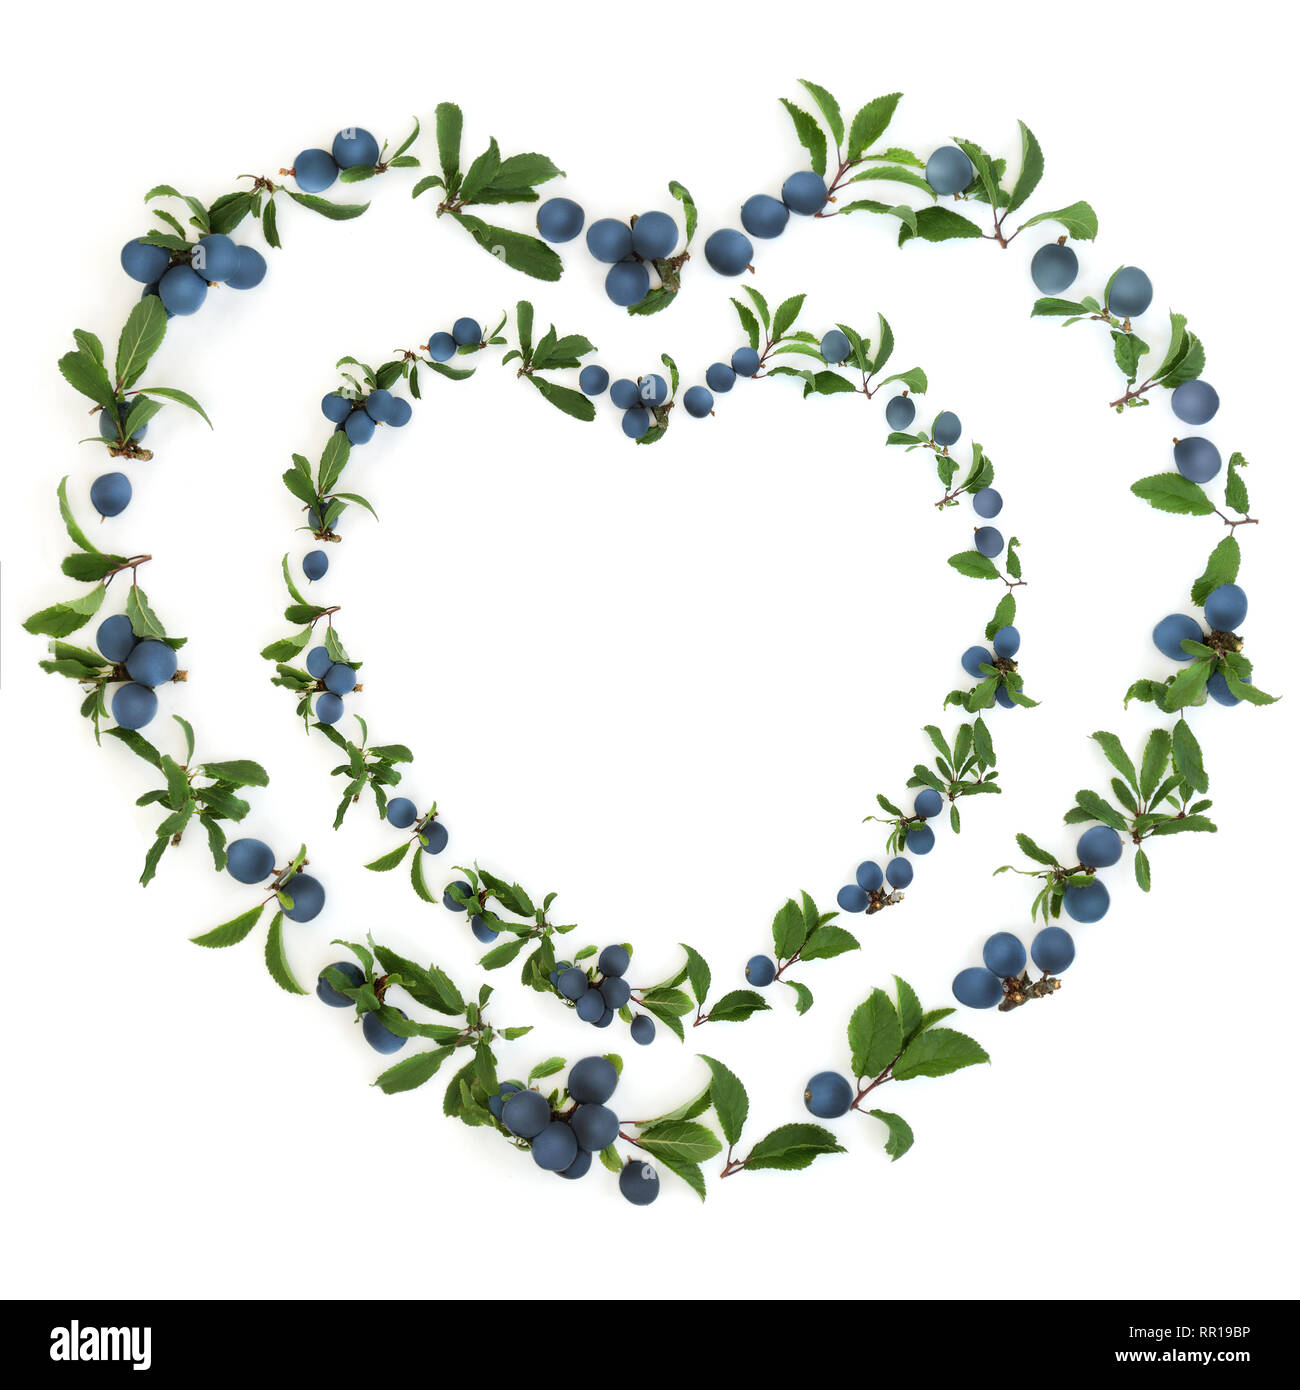 Abstract heart shaped sloe berry wreath on white background also known as buckthorn. Pruna spinosa. Stock Photo